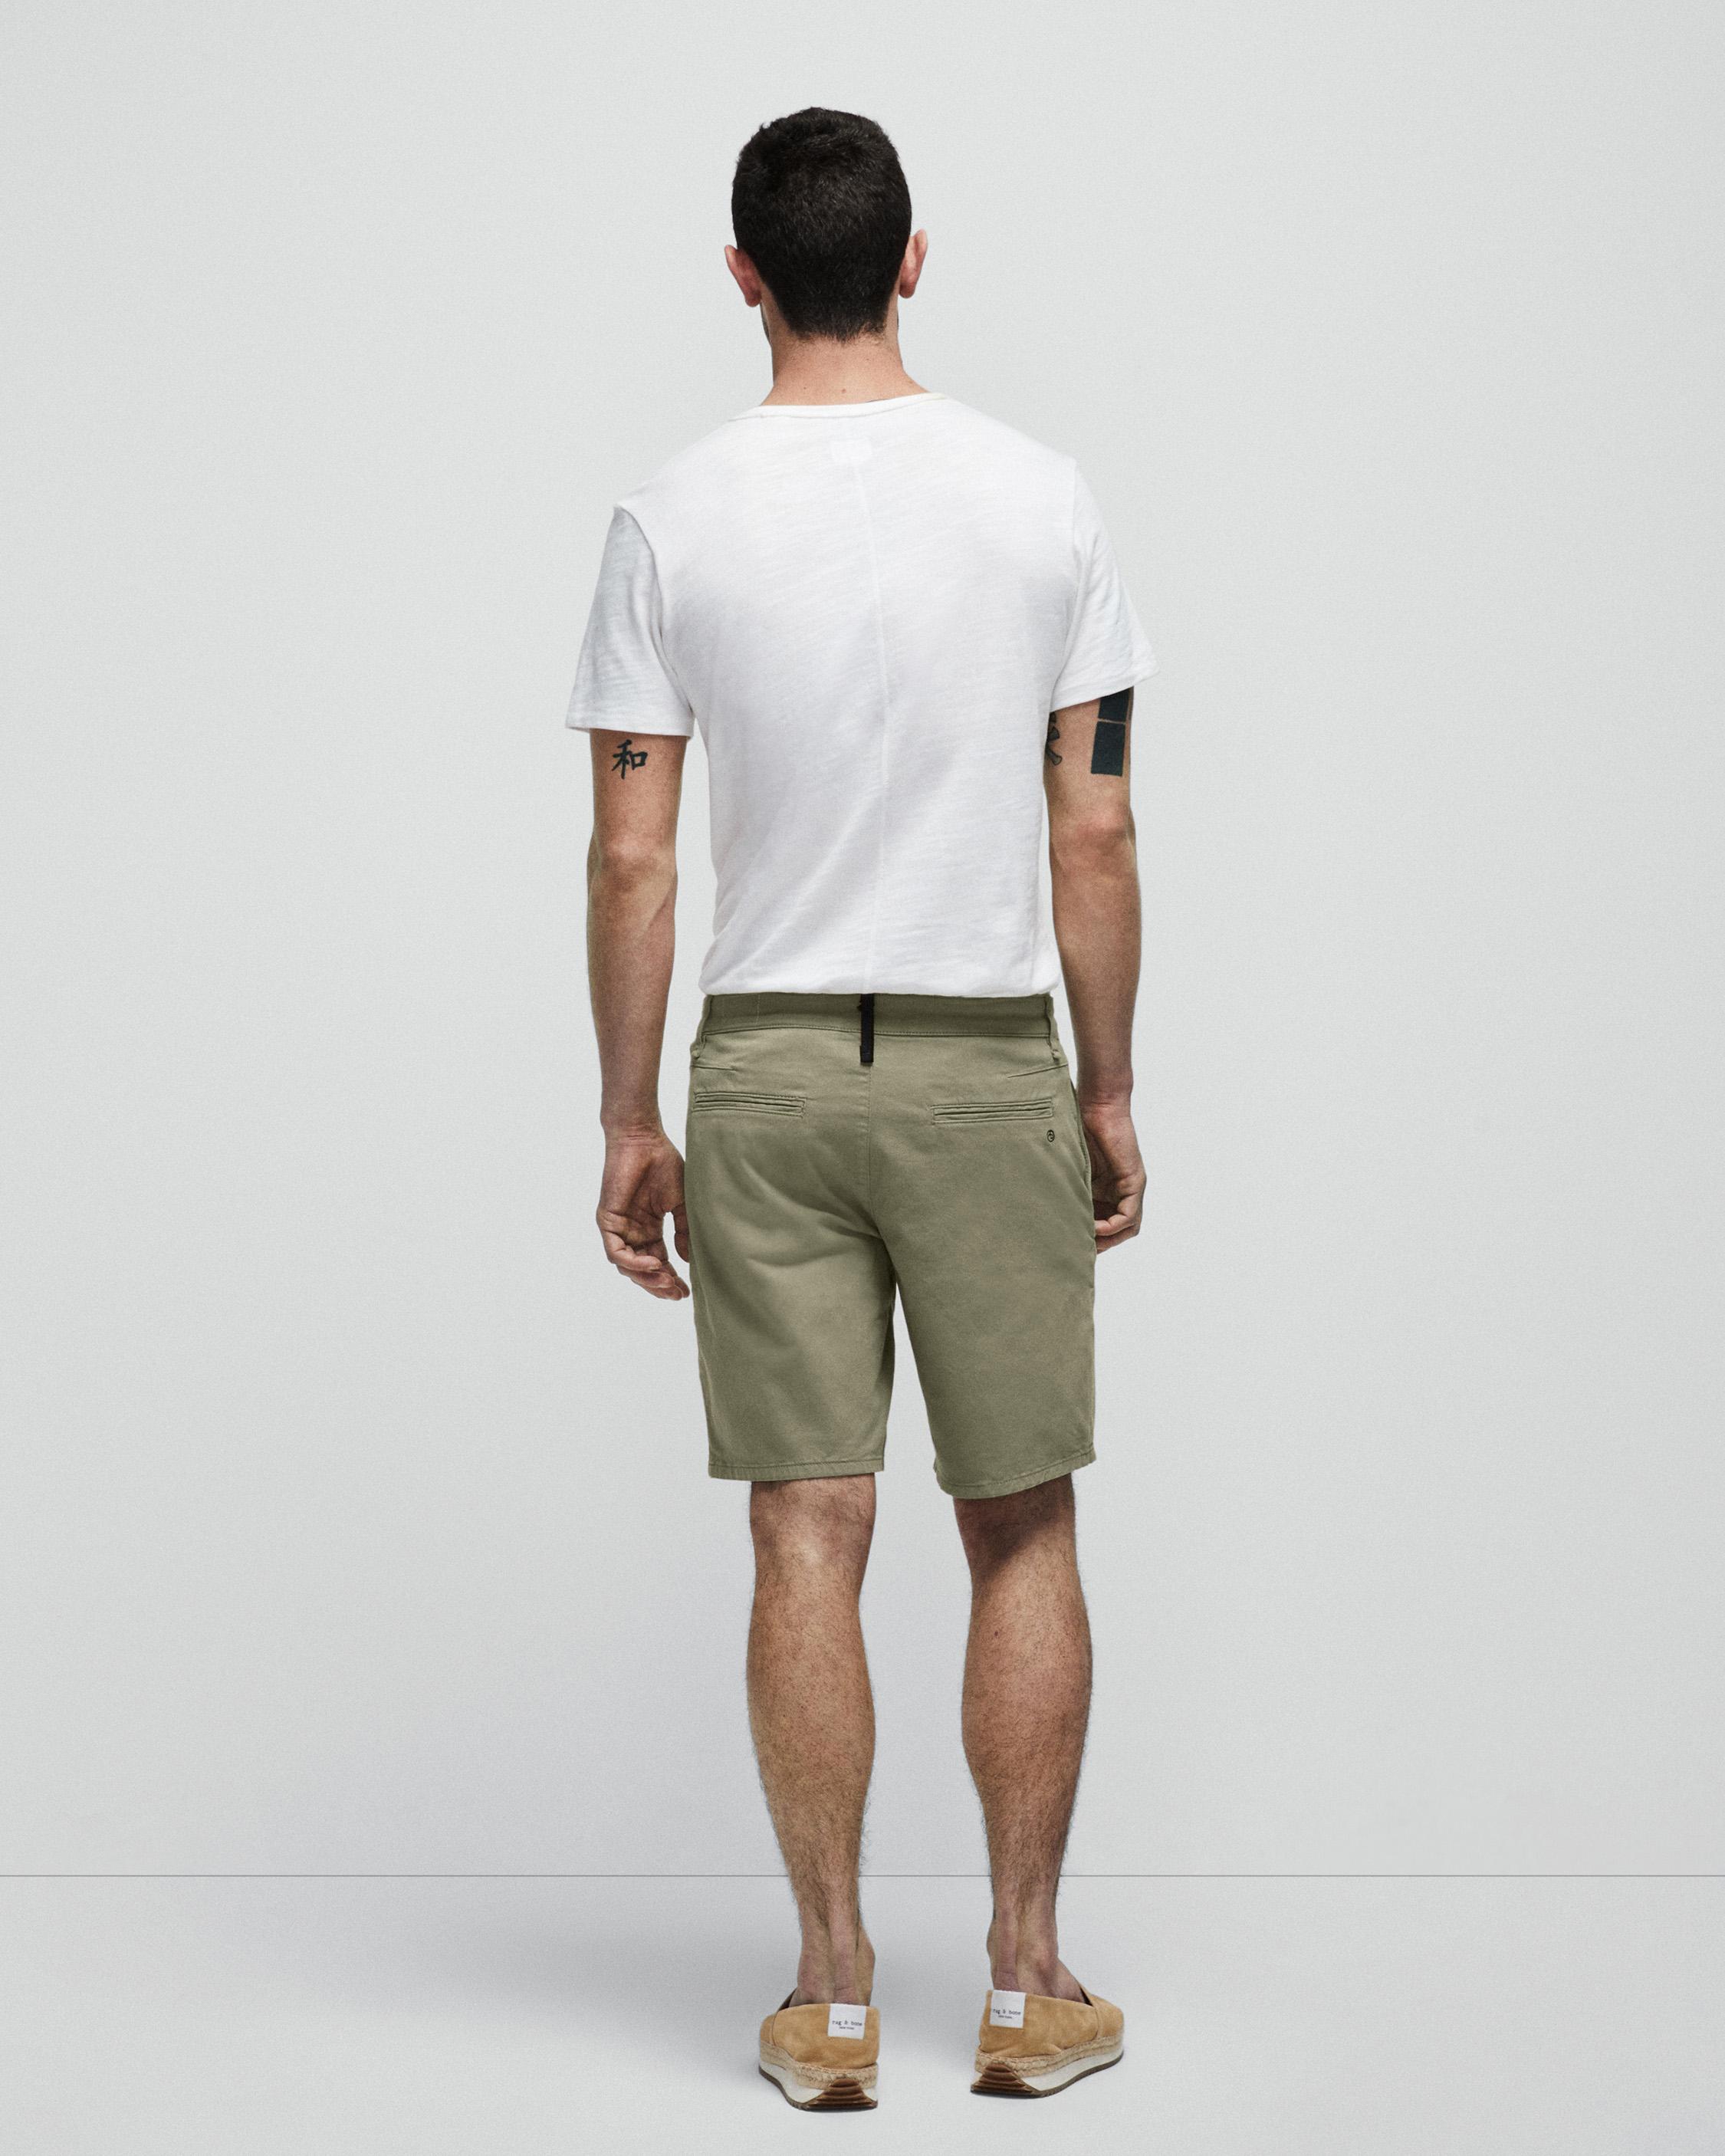 https://cdn.media.amplience.net/i/rb/MBW22S923936ML-335-G/Perry-Cotton-Stretch-Twill-Short-335?$large$&fmt=auto